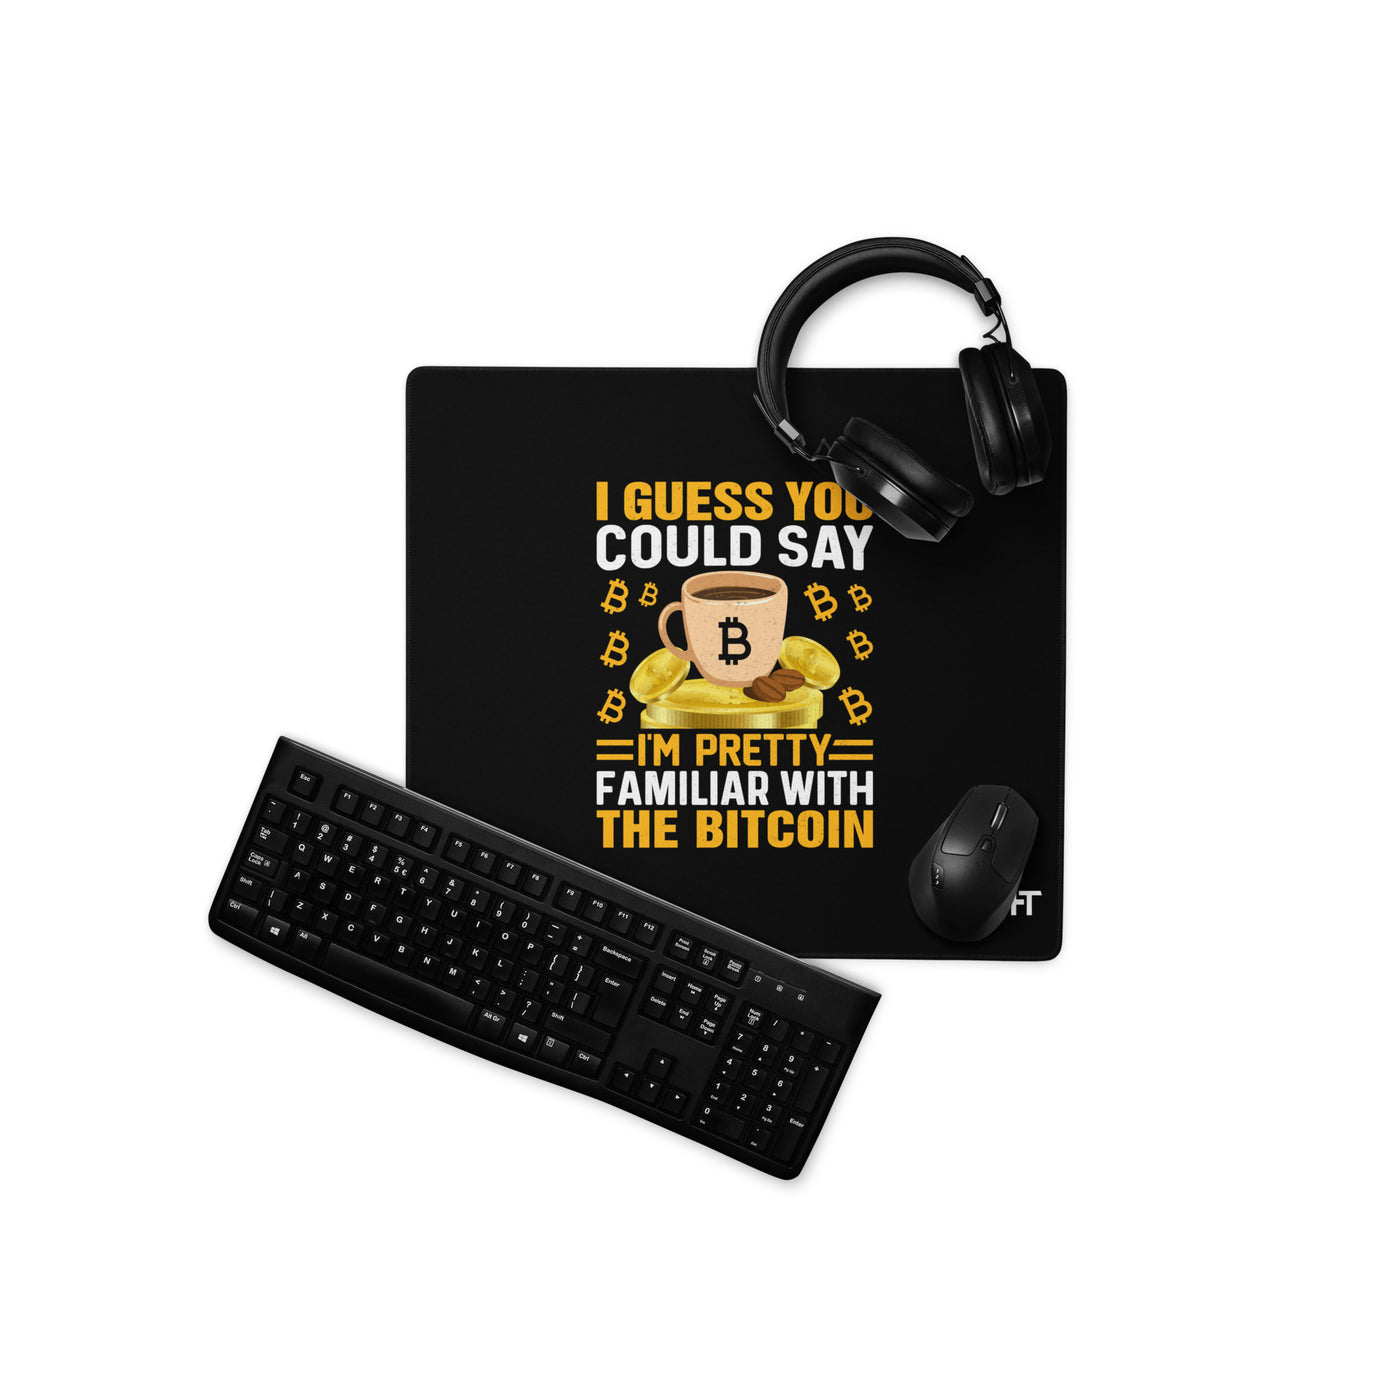 I guess you could say I am pretty familiar with the Bitcoin - Desk Mat